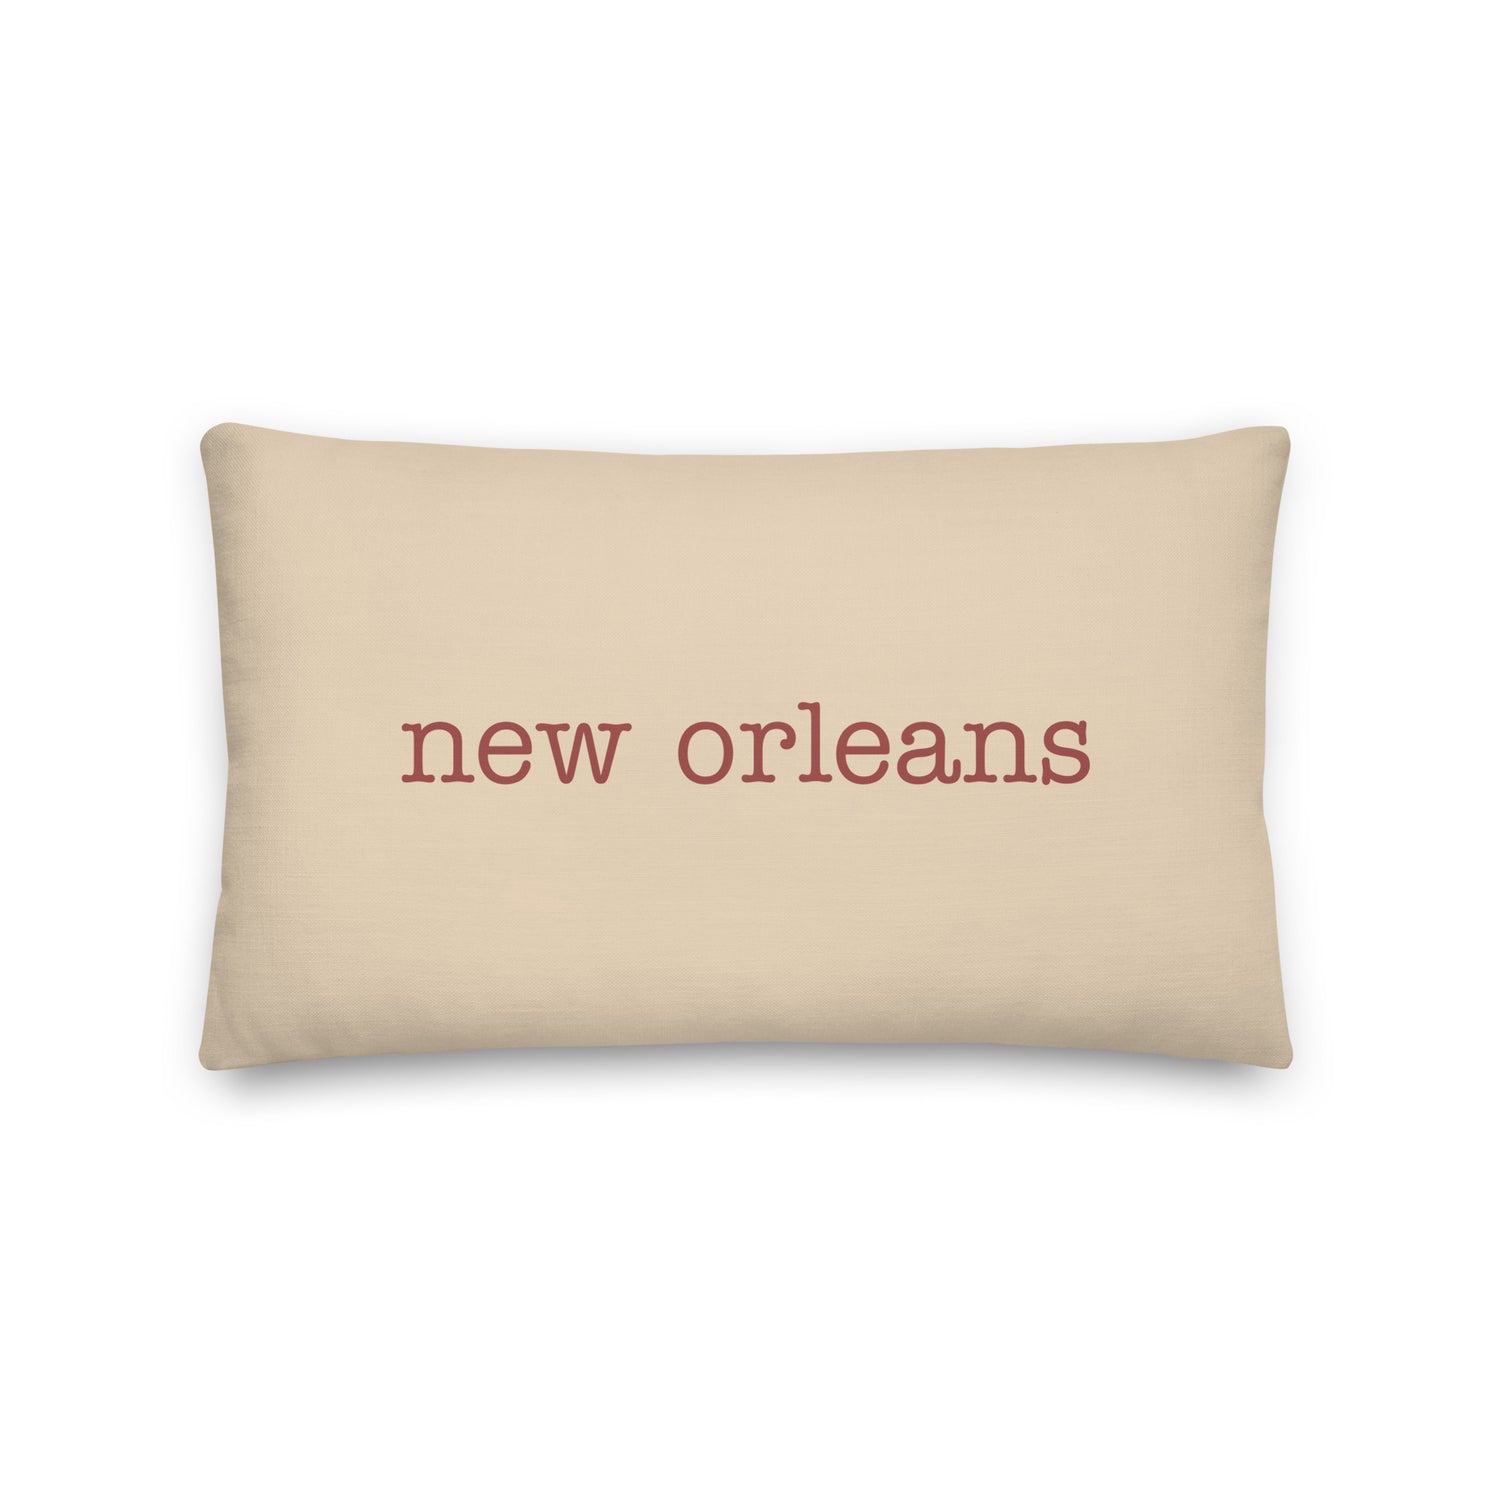 New Orleans Louisiana Pillows and Blankets • MSY Airport Code